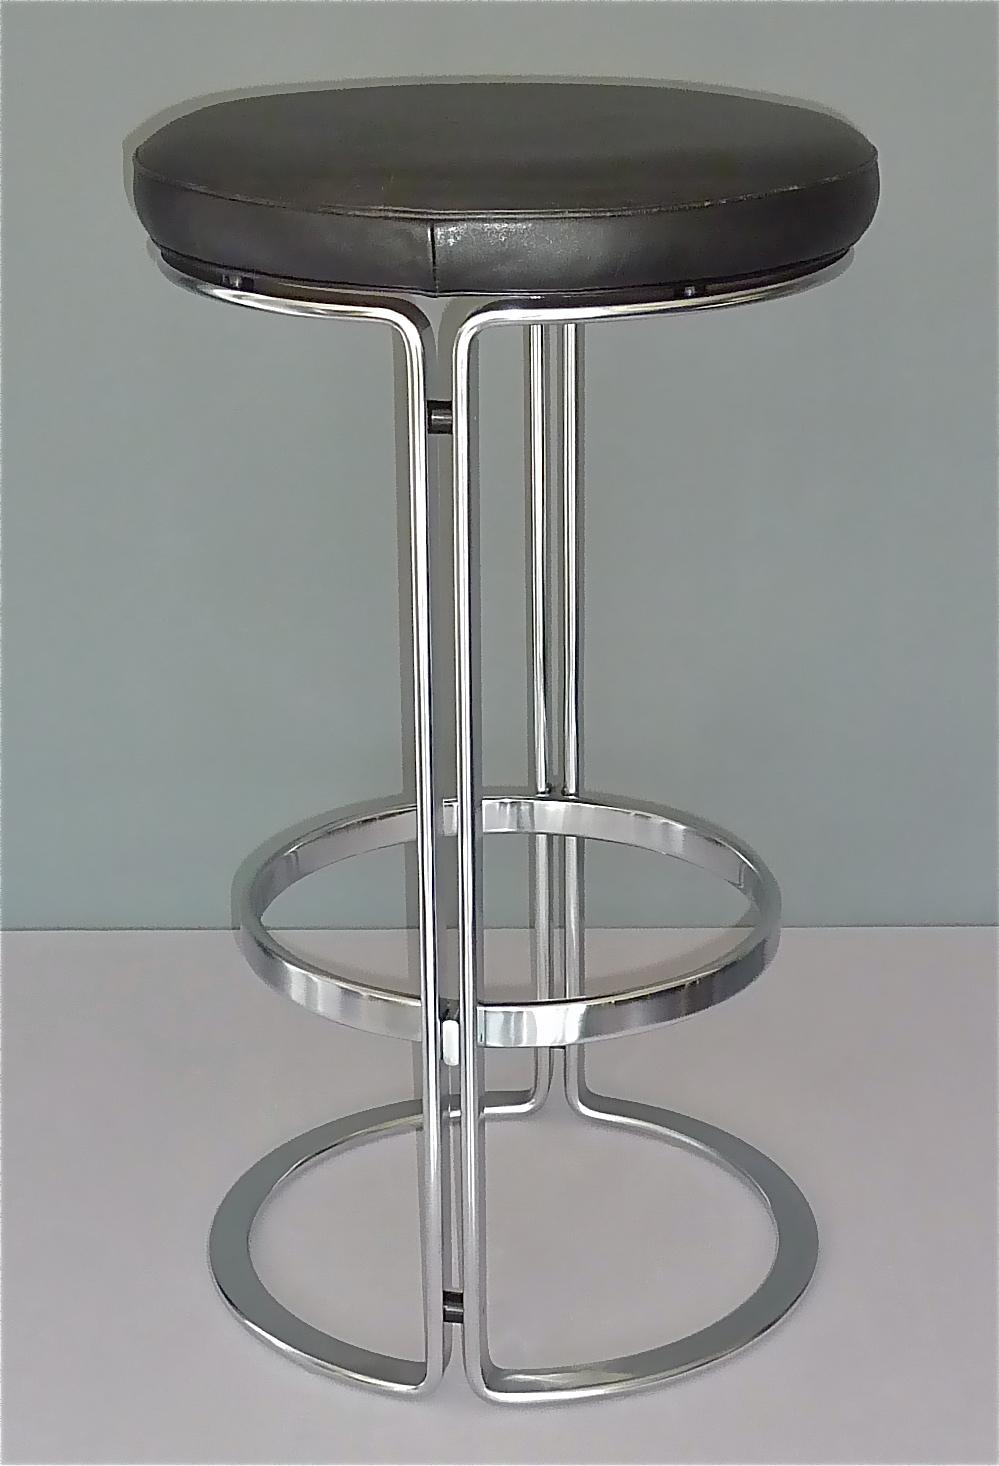 Design Horst Bruning for Kill International, bar stool in steel and upholstered in black leather, Germany circa 1968s, heavy amazing high quality and comfortable seating.
The height of the bar stool is 80 cm / 31.50 inches tall and it has a width of